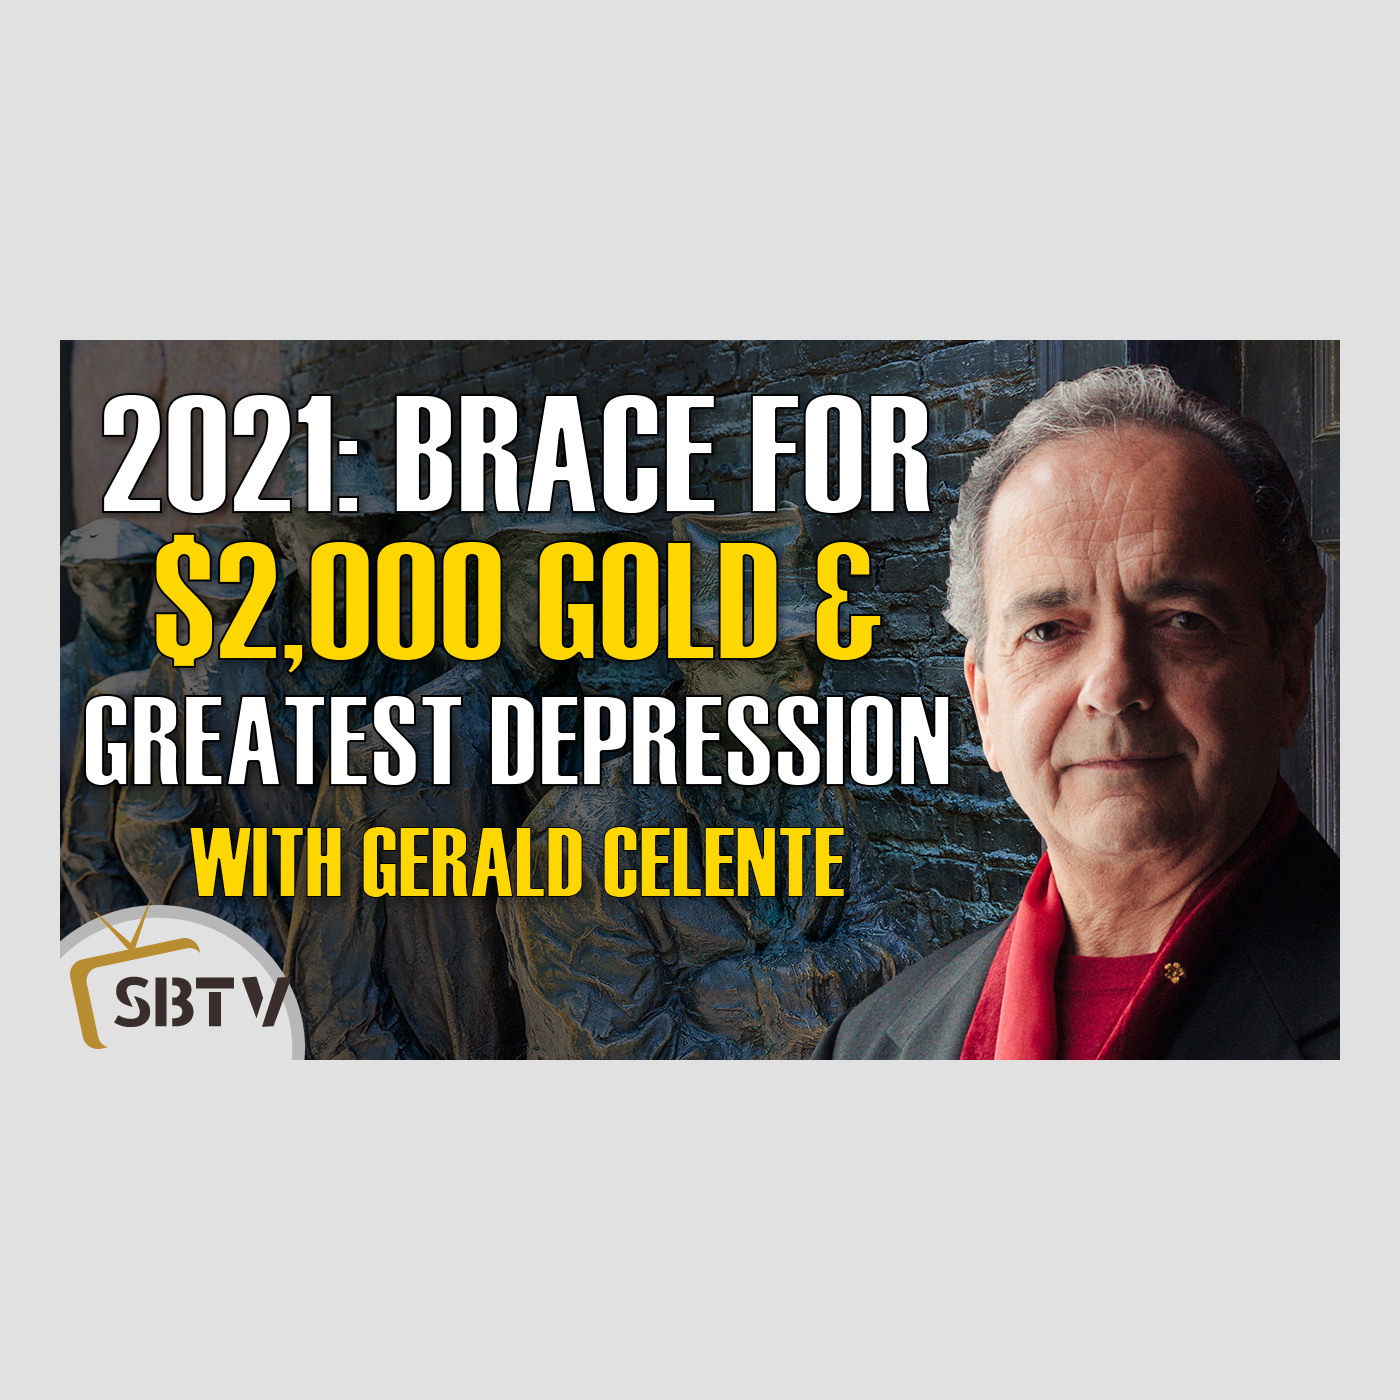 98 Gerald Celente - $2000 Gold Coming and Brace For The Greatest Depression Ever Seen by Early 2021